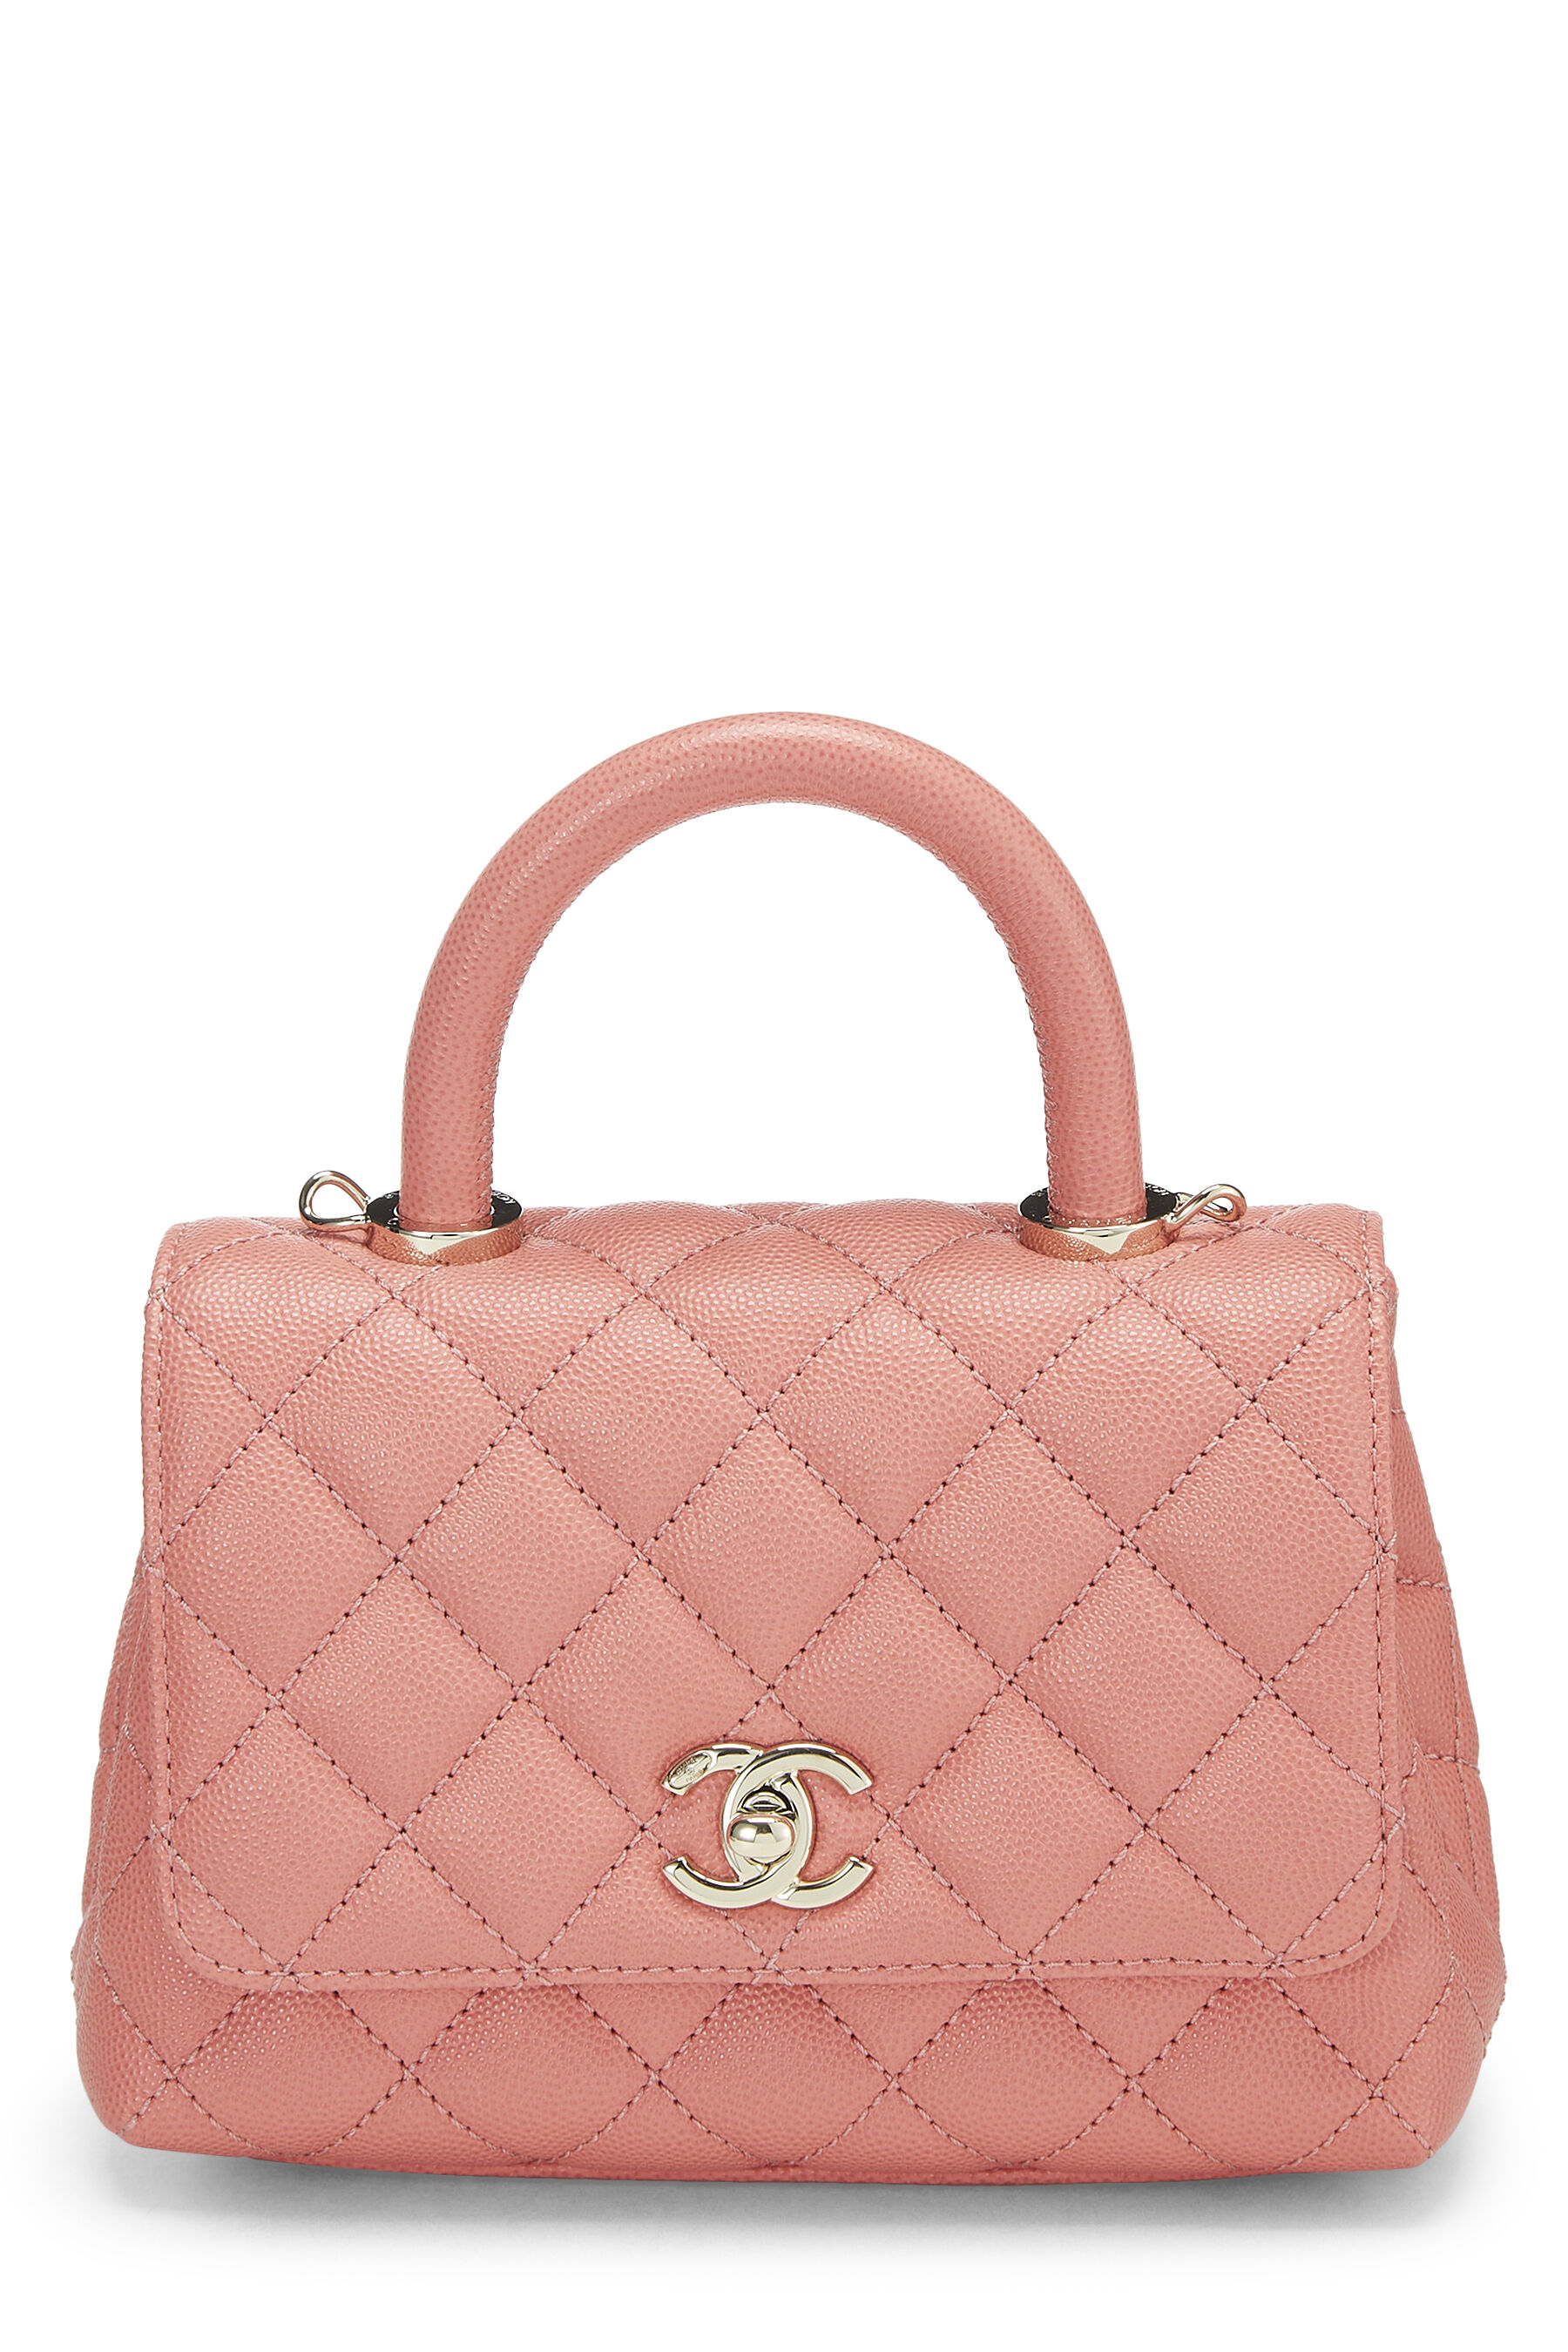 Chanel Pink Quilted Caviar Coco Handle Bag Mini